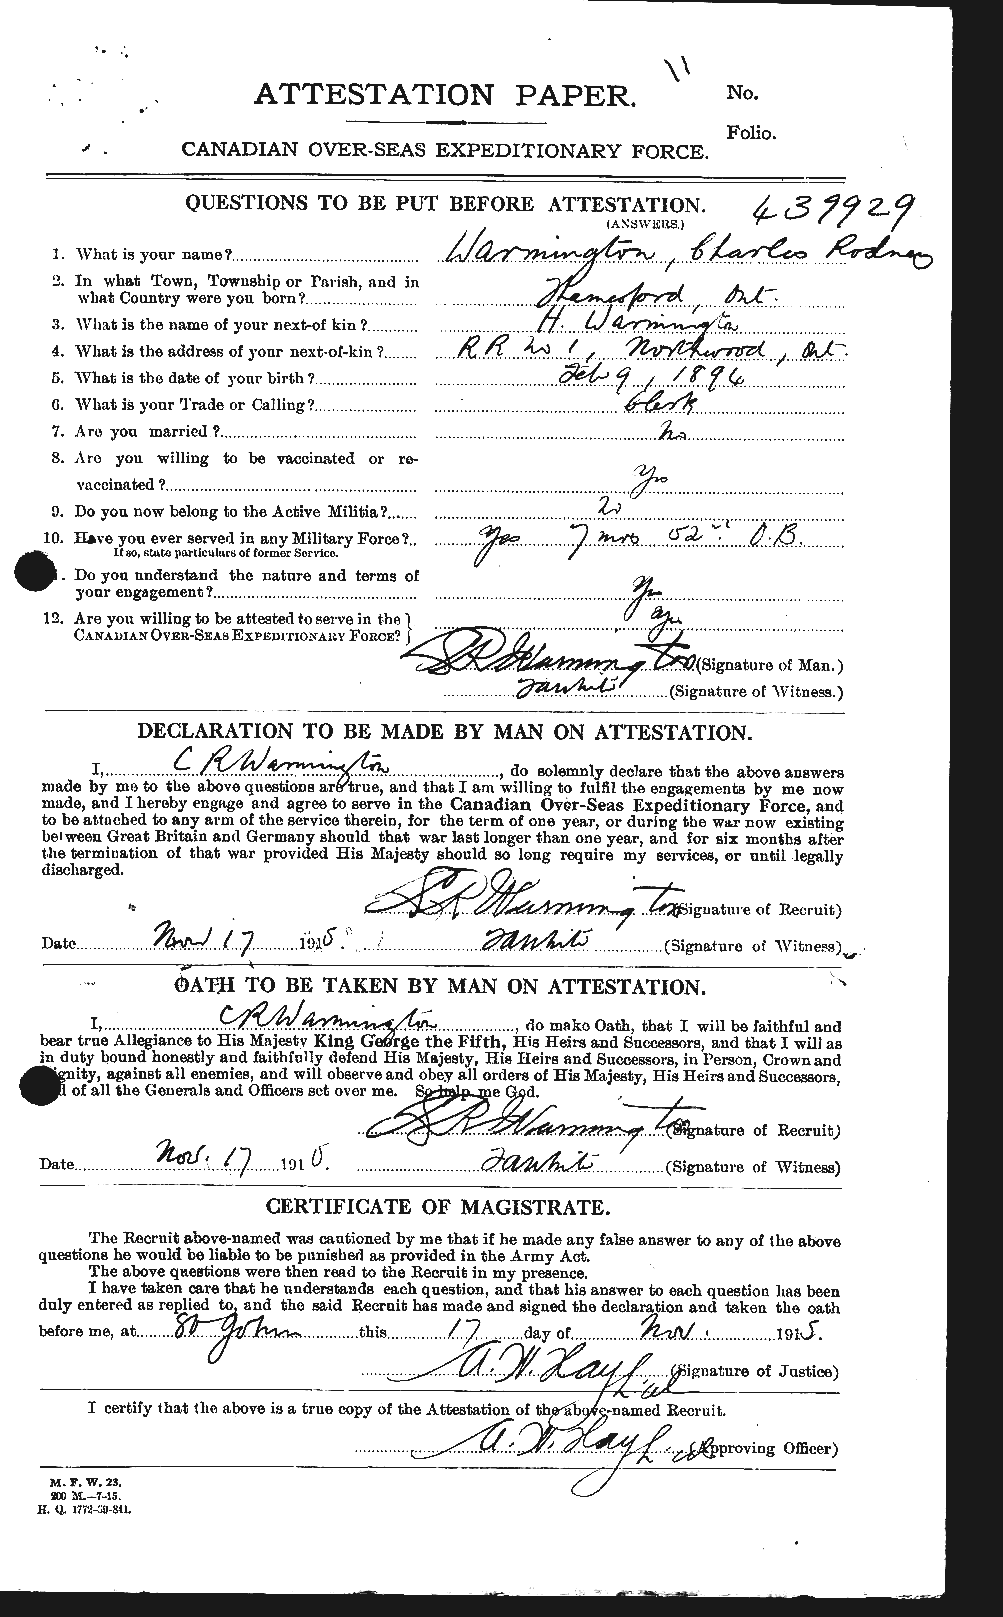 Personnel Records of the First World War - CEF 657238a